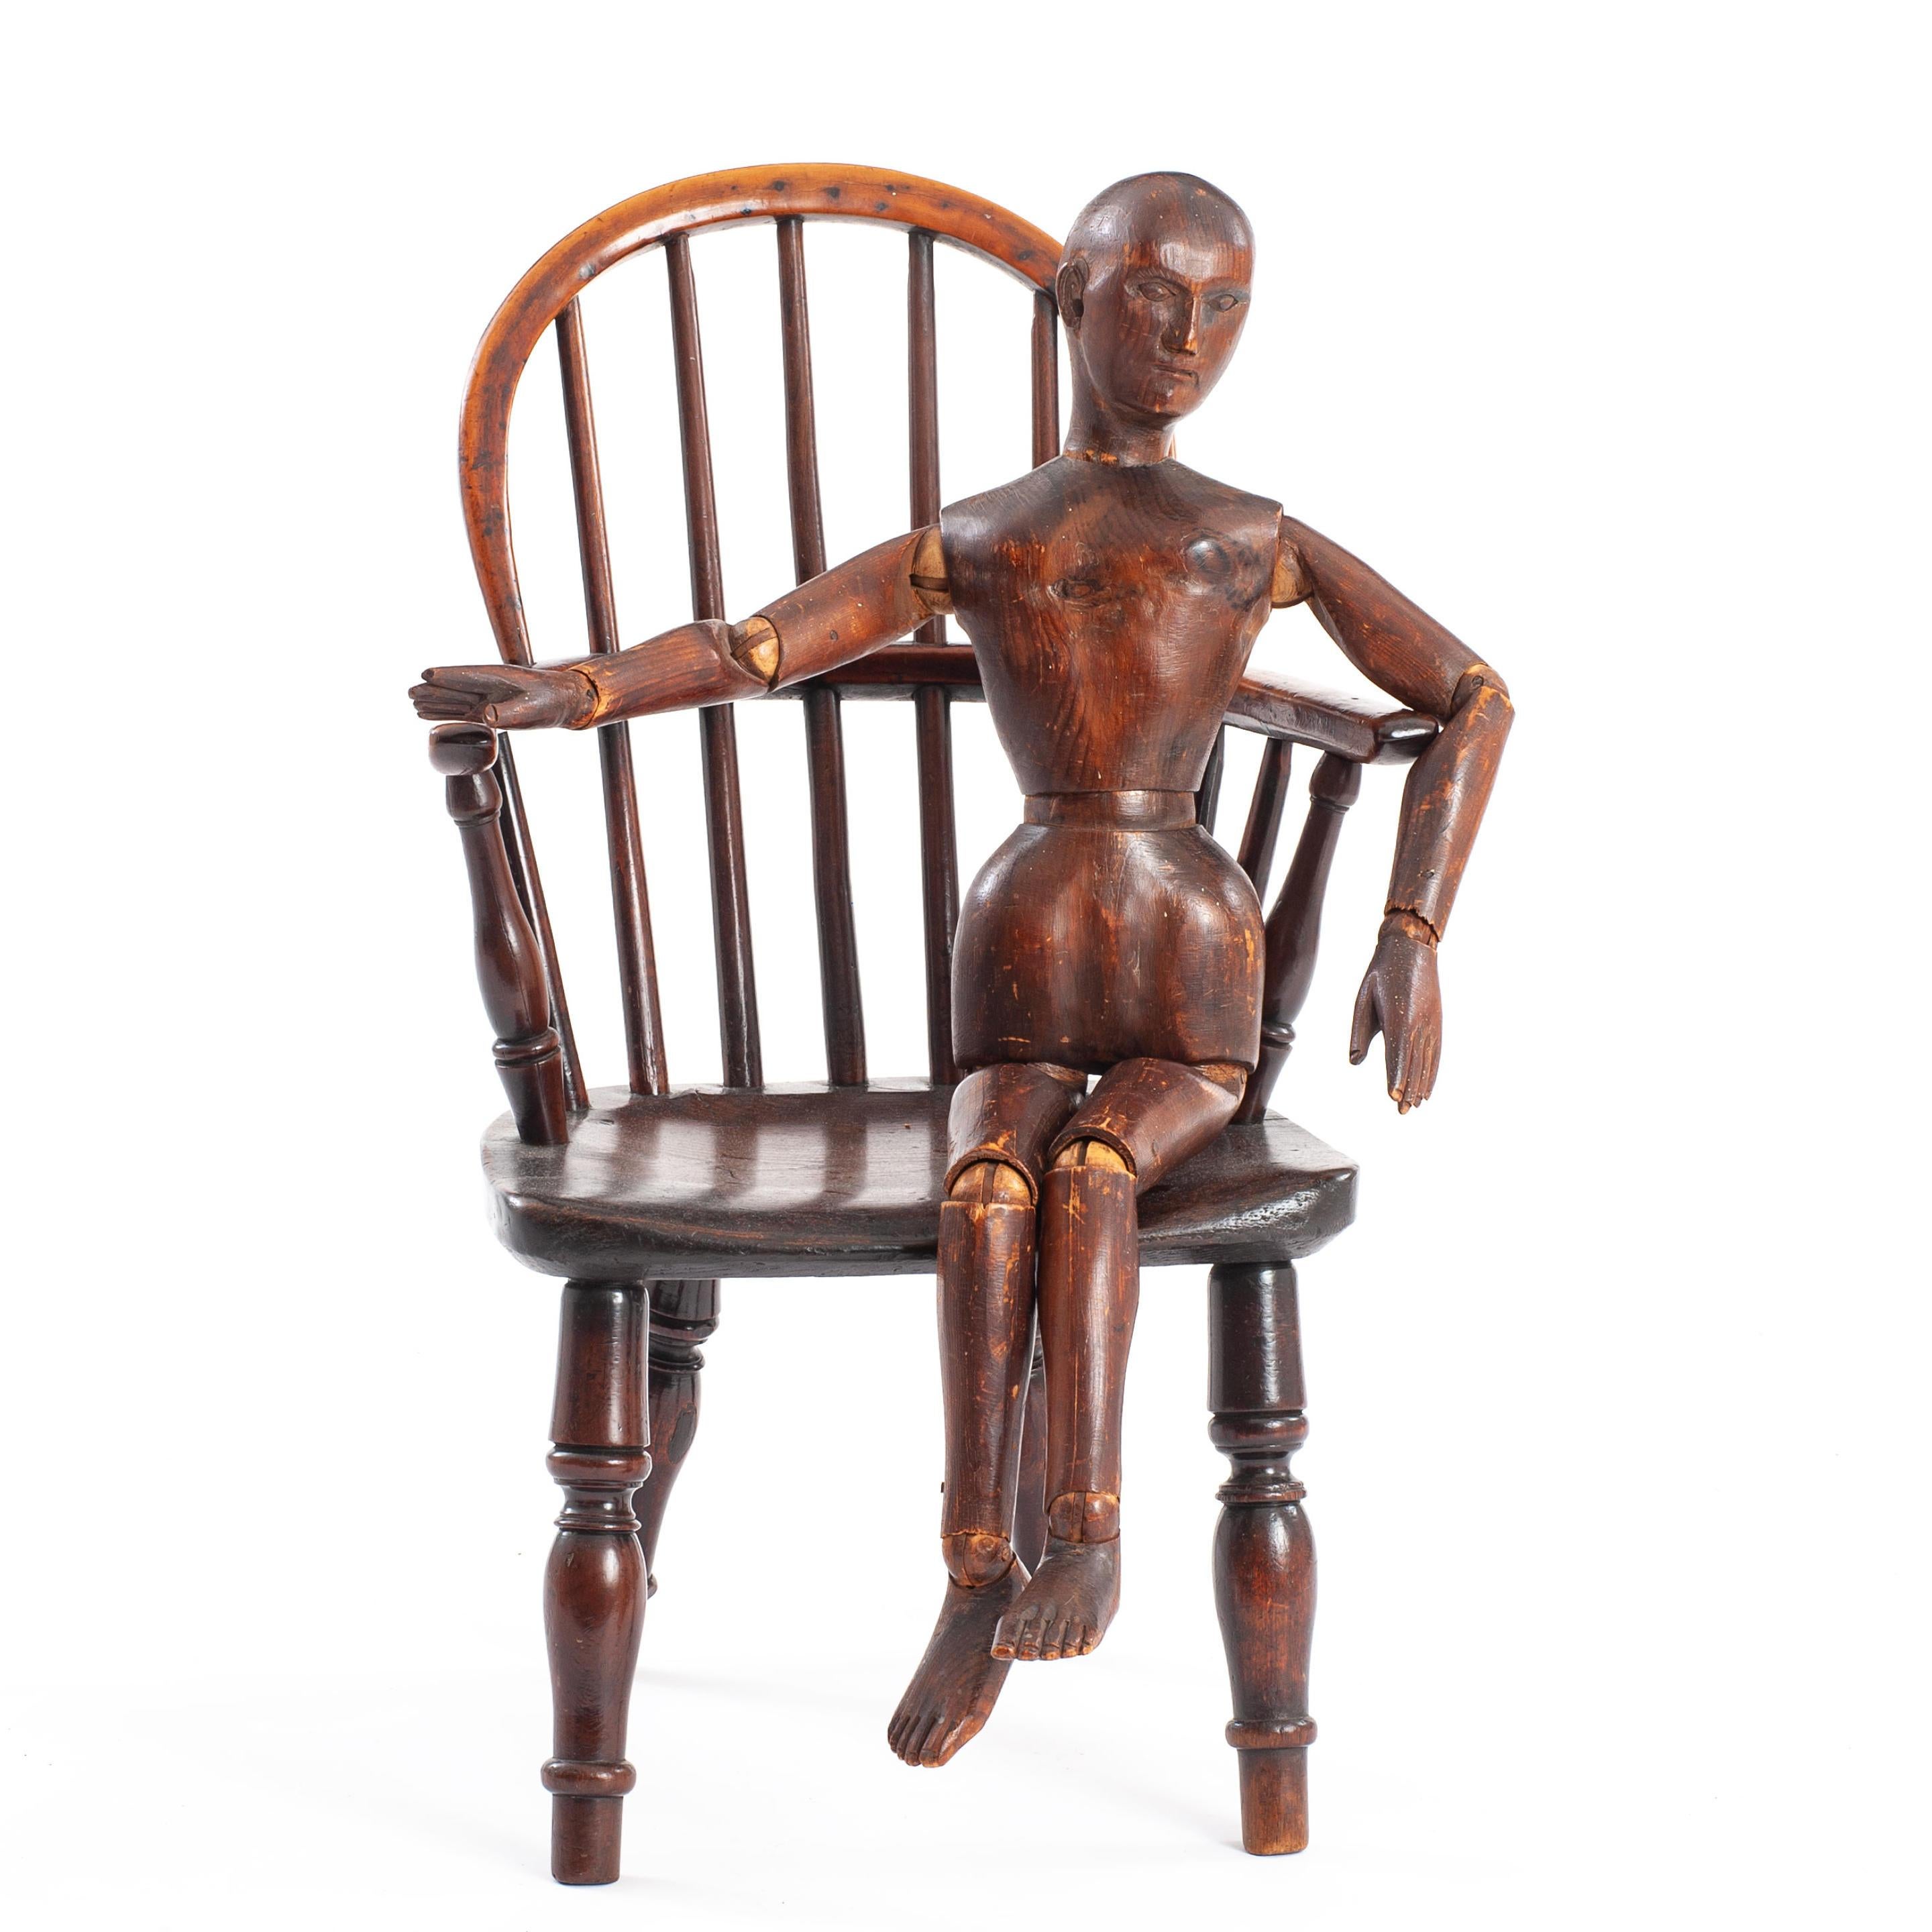 Rare, artist's wooden lay figure.
With articulated joints and intricately carved facial detail.
England, circa 1860.